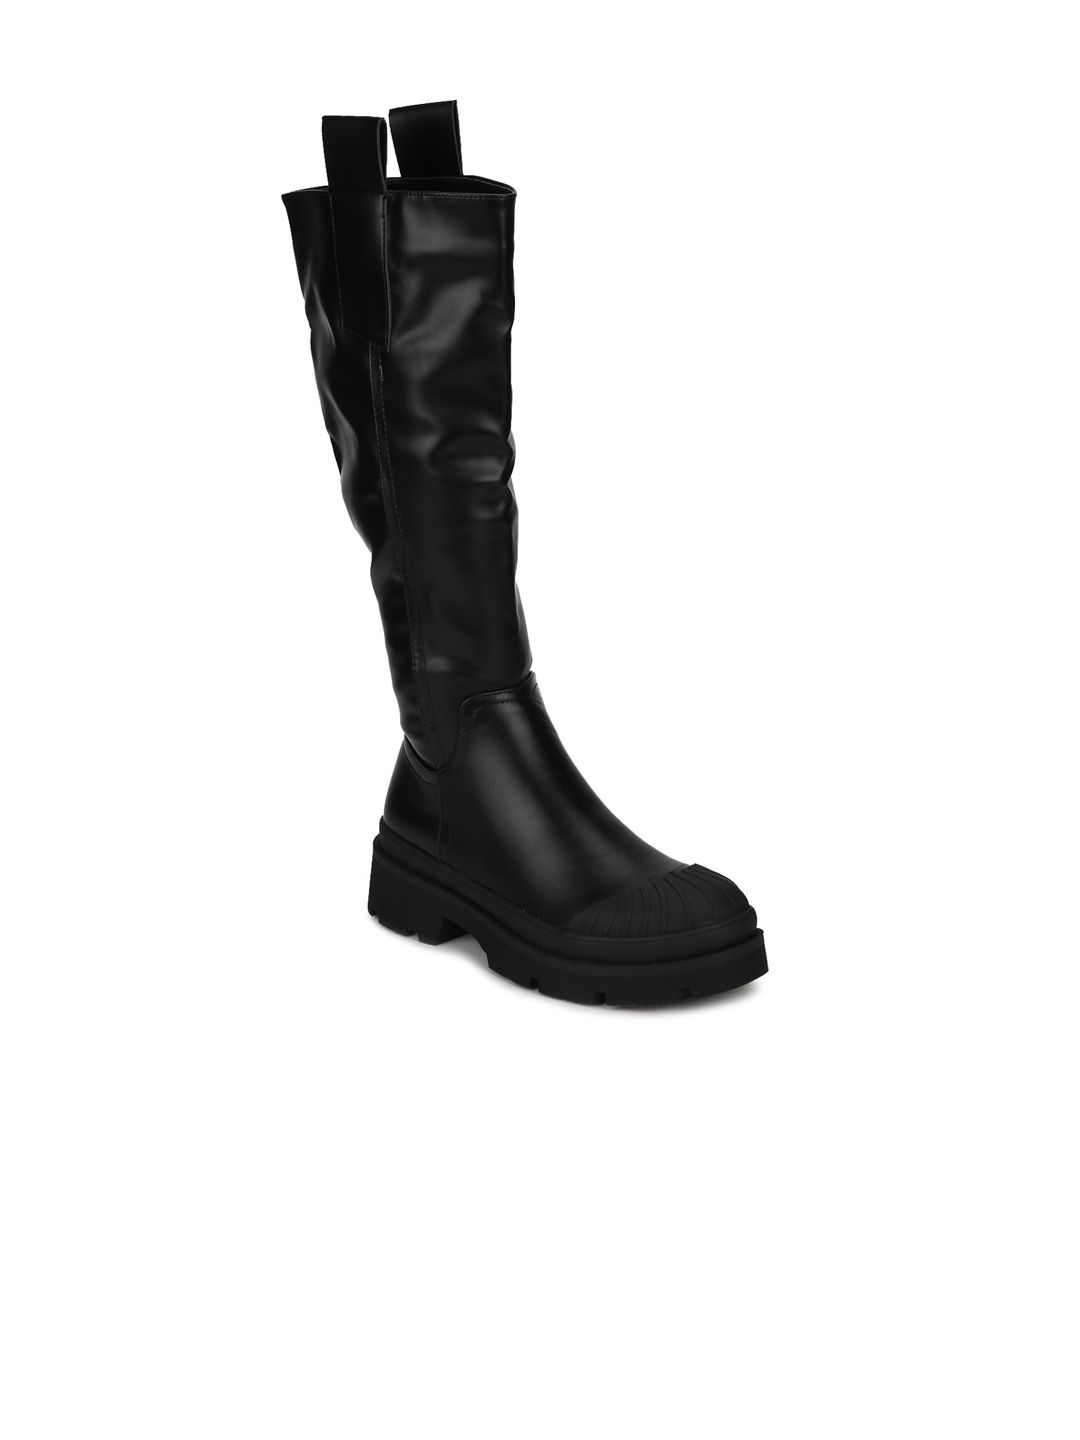 Truffle Collection Black High-Top Platform Heeled Boots Price in India